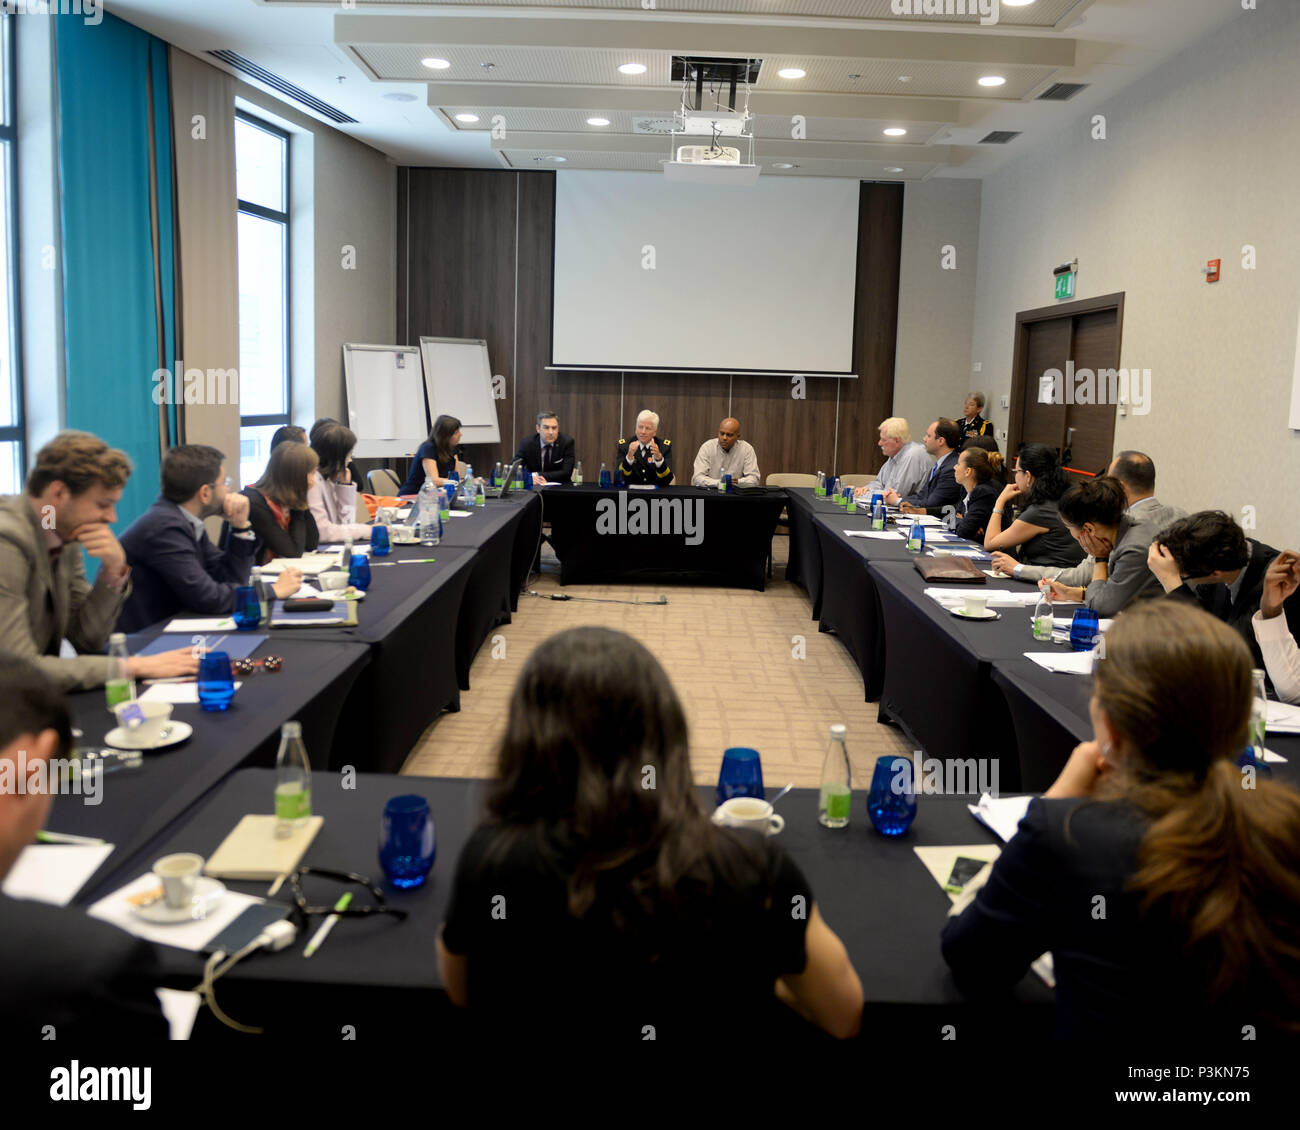 Brig. Gen. Giselle Wilz, NATO Headquarters Sarajevo commander, and Rohan Maxwell, the commander’s senior political-military advisor, met with twenty rising leaders under 35 years old at an event organized by the Atlantic Council of Washington, D.C. in Sarajevo, Bosnia and Herzegovina, July 4, 2016. Stock Photo